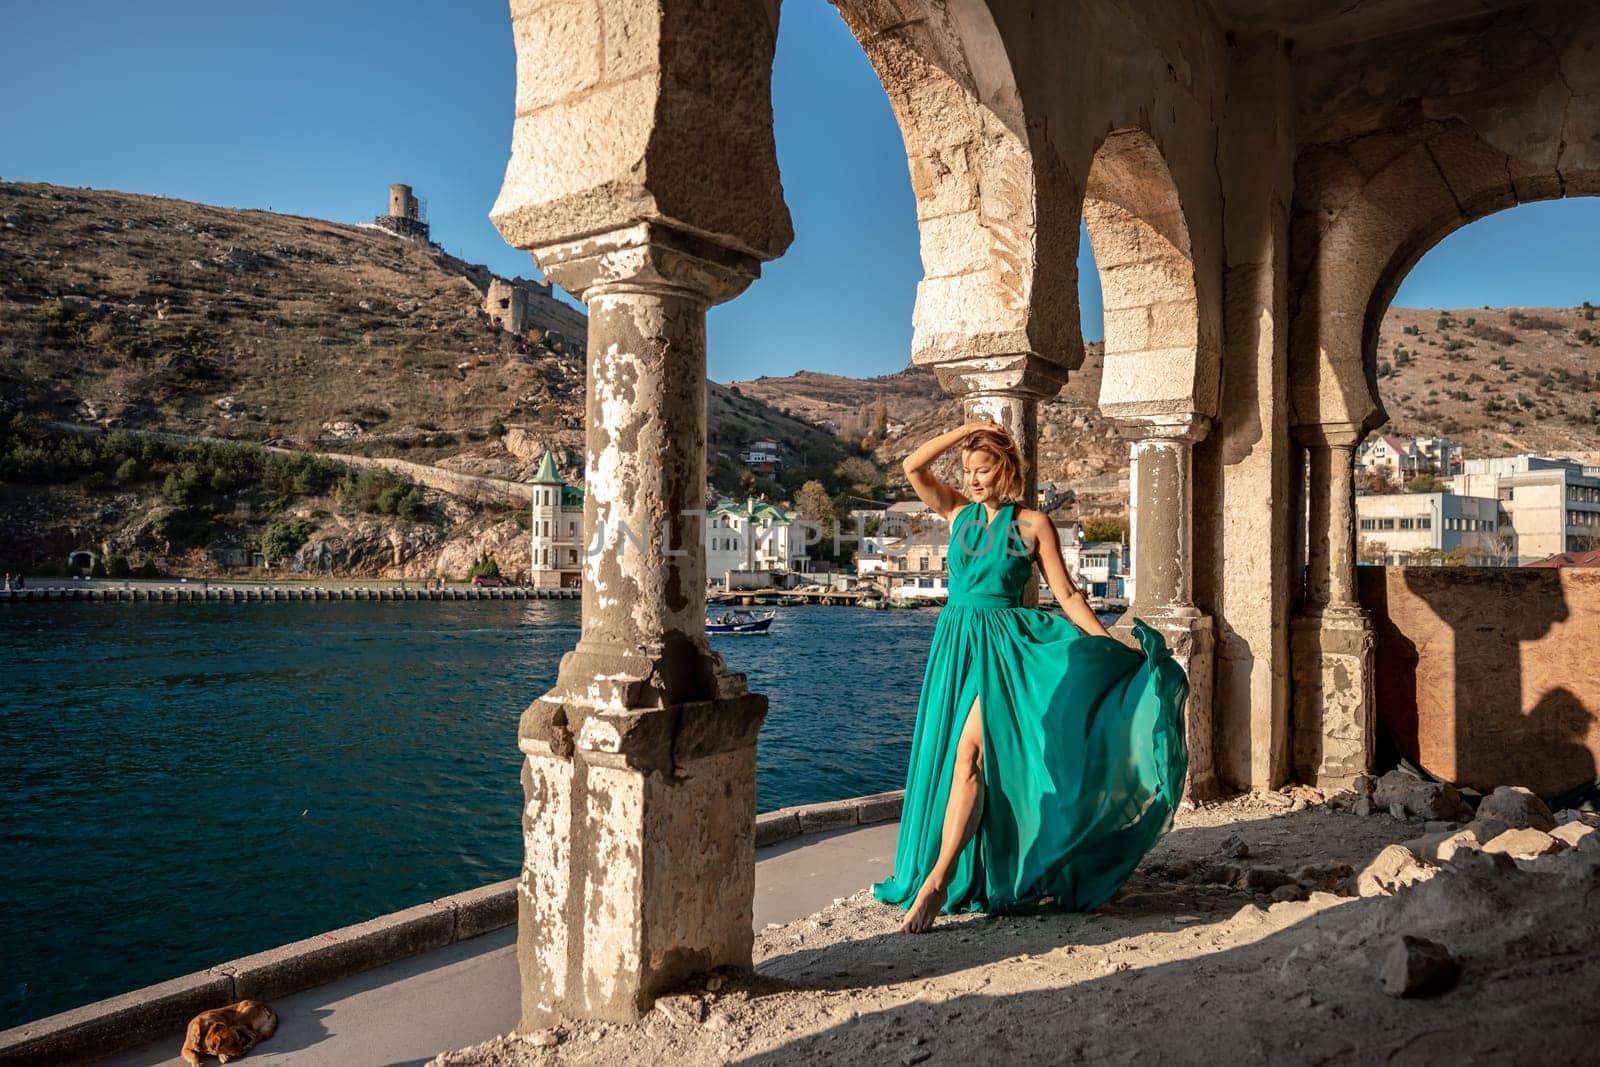 Woman dress sea columns. Rear view of a happy blonde woman in a long mint dress posing against the backdrop of the sea in an old building with columns. by Matiunina